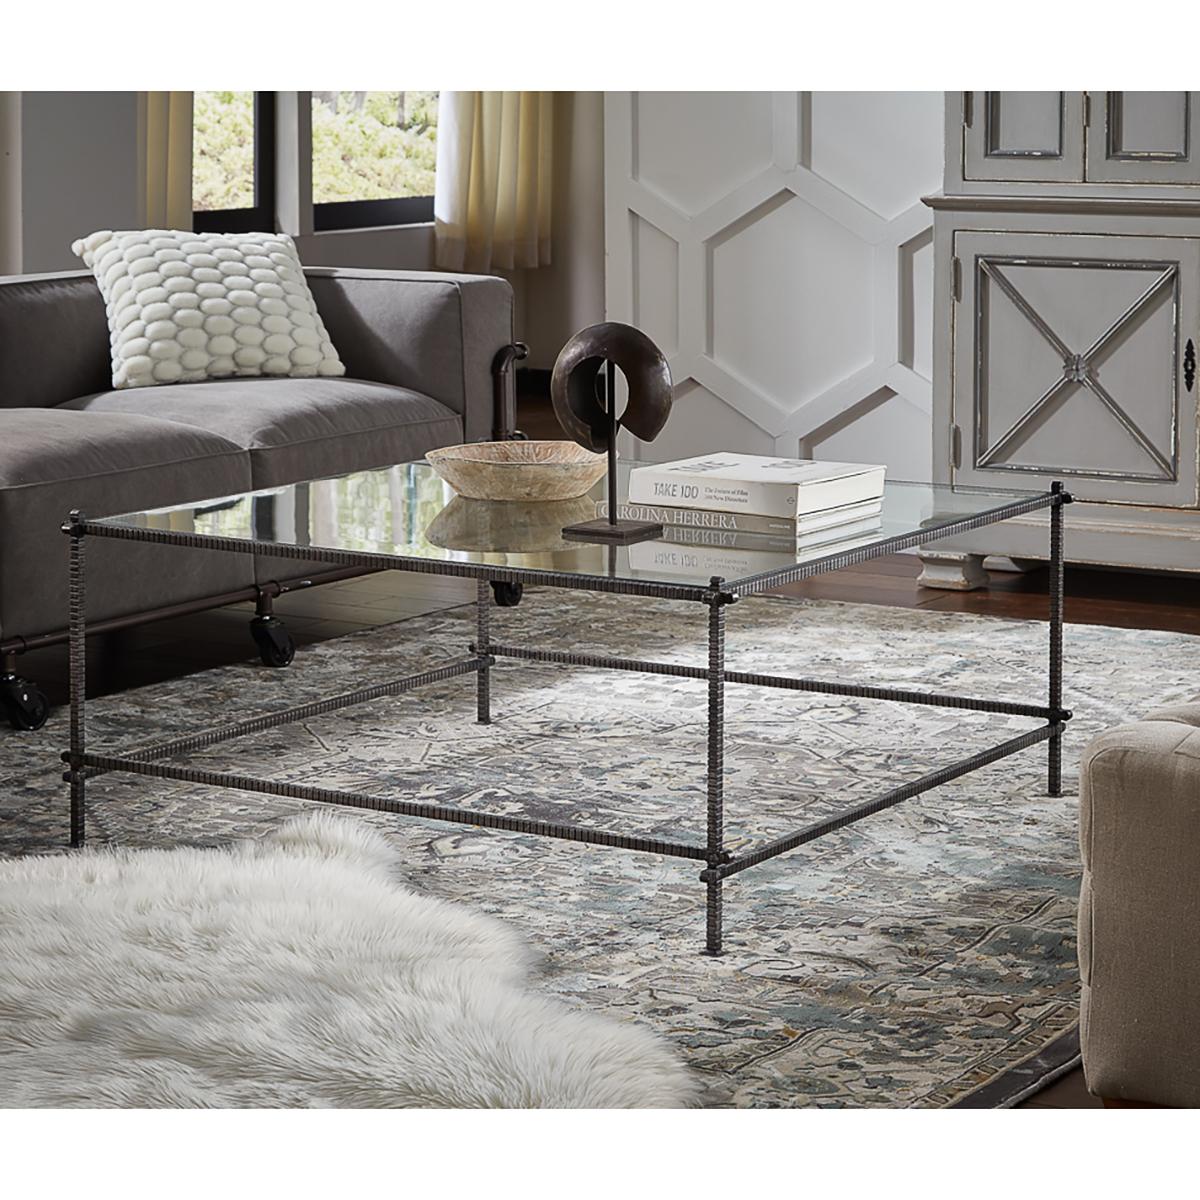 Square Industrial Coffee Table For Sale 2